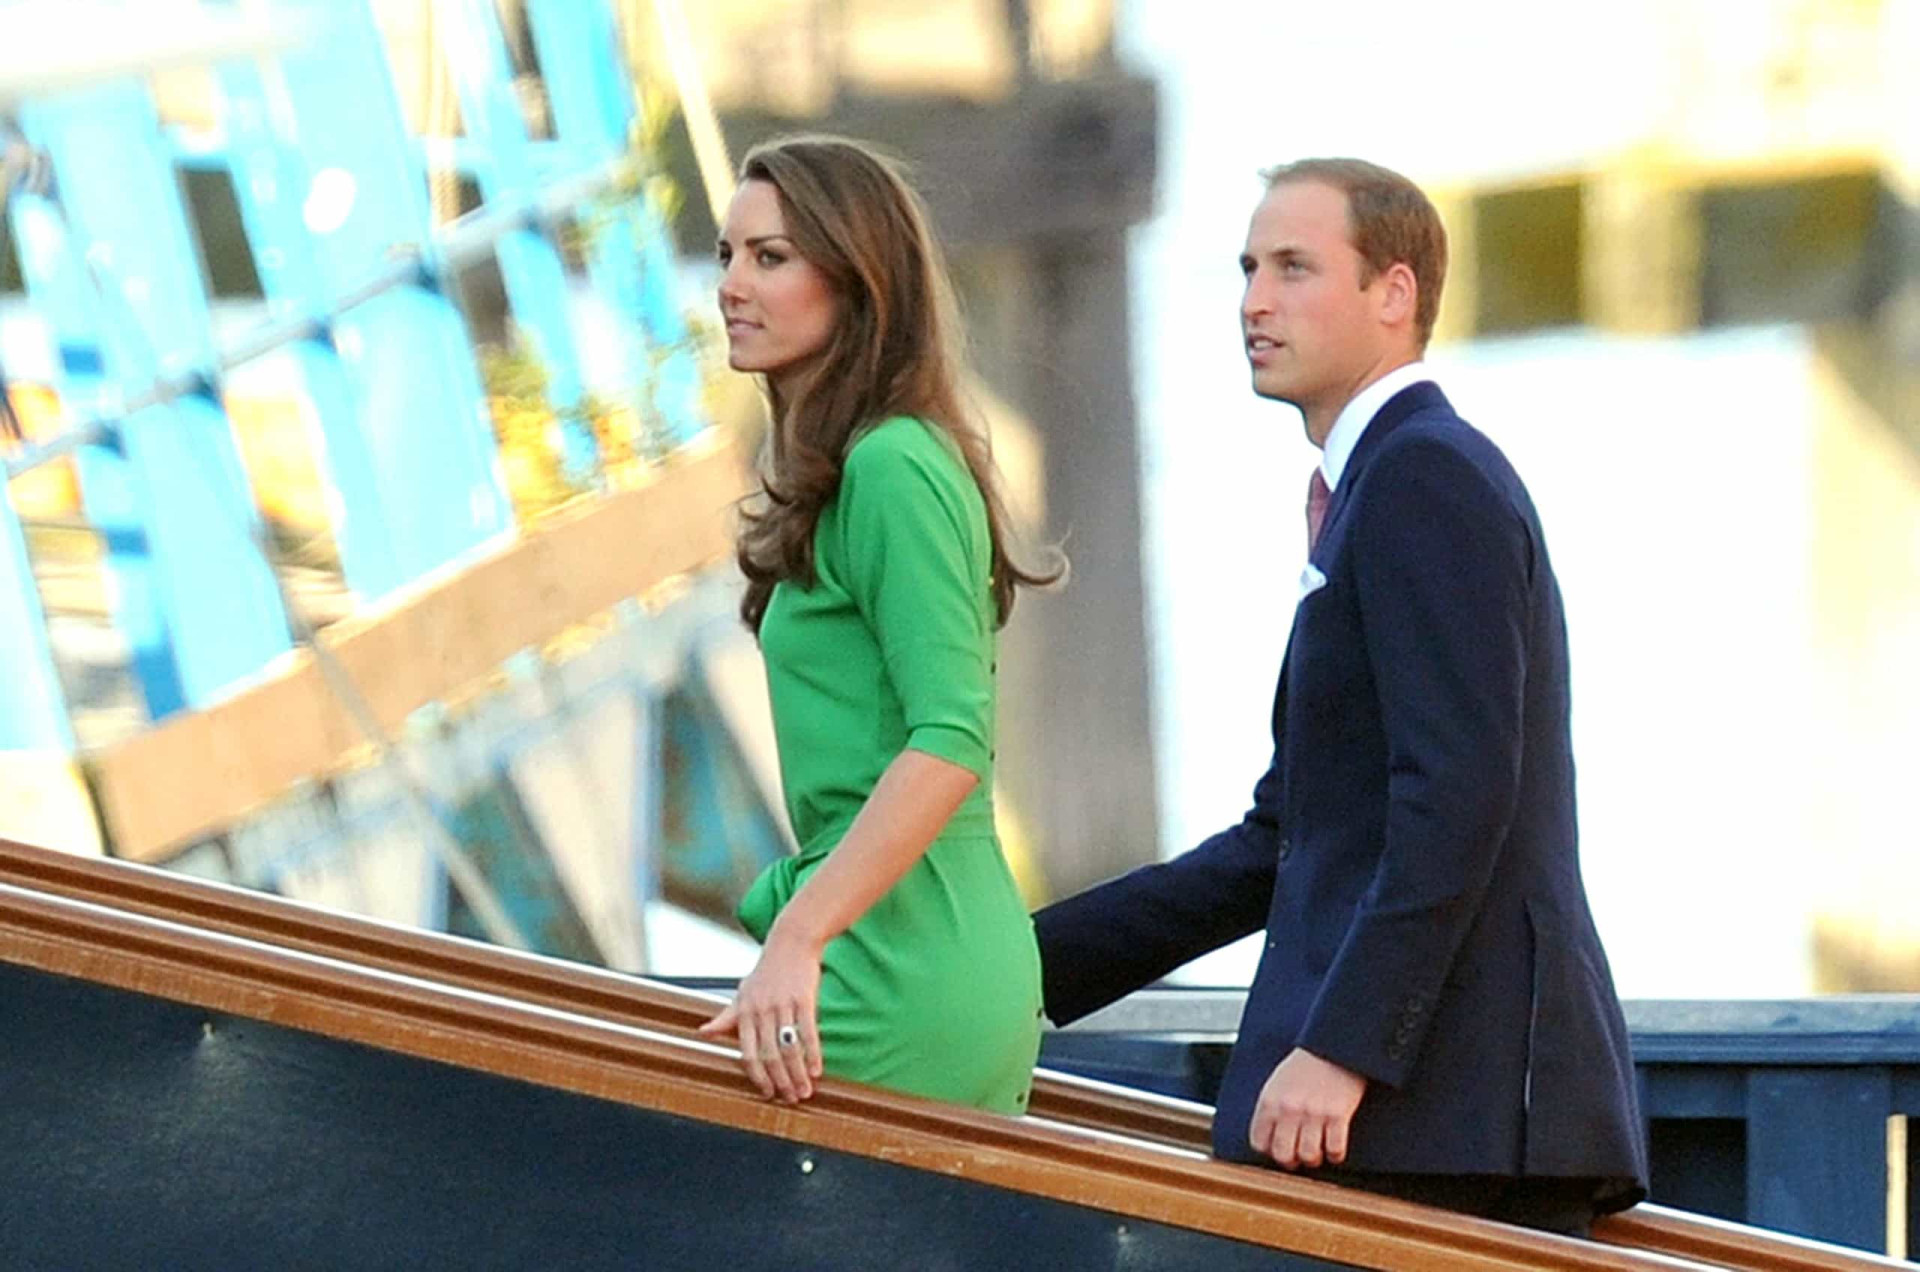 <p><em>Britannia</em> still hosts the occasional royal get-together. Pictured on July 29, 2011 are Kate and William arriving for an evening reception onboard the royal yacht to celebrate the impending wedding of Zara Phillips (the eldest granddaughter of Queen Elizabeth II) and Mike Tindall.</p><p><a href="https://www.msn.com/en-ph/community/channel/vid-7xx8mnucu55yw63we9va2gwr7uihbxwc68fxqp25x6tg4ftibpra?cvid=94631541bc0f4f89bfd59158d696ad7e">Follow us and access great exclusive content every day</a></p>